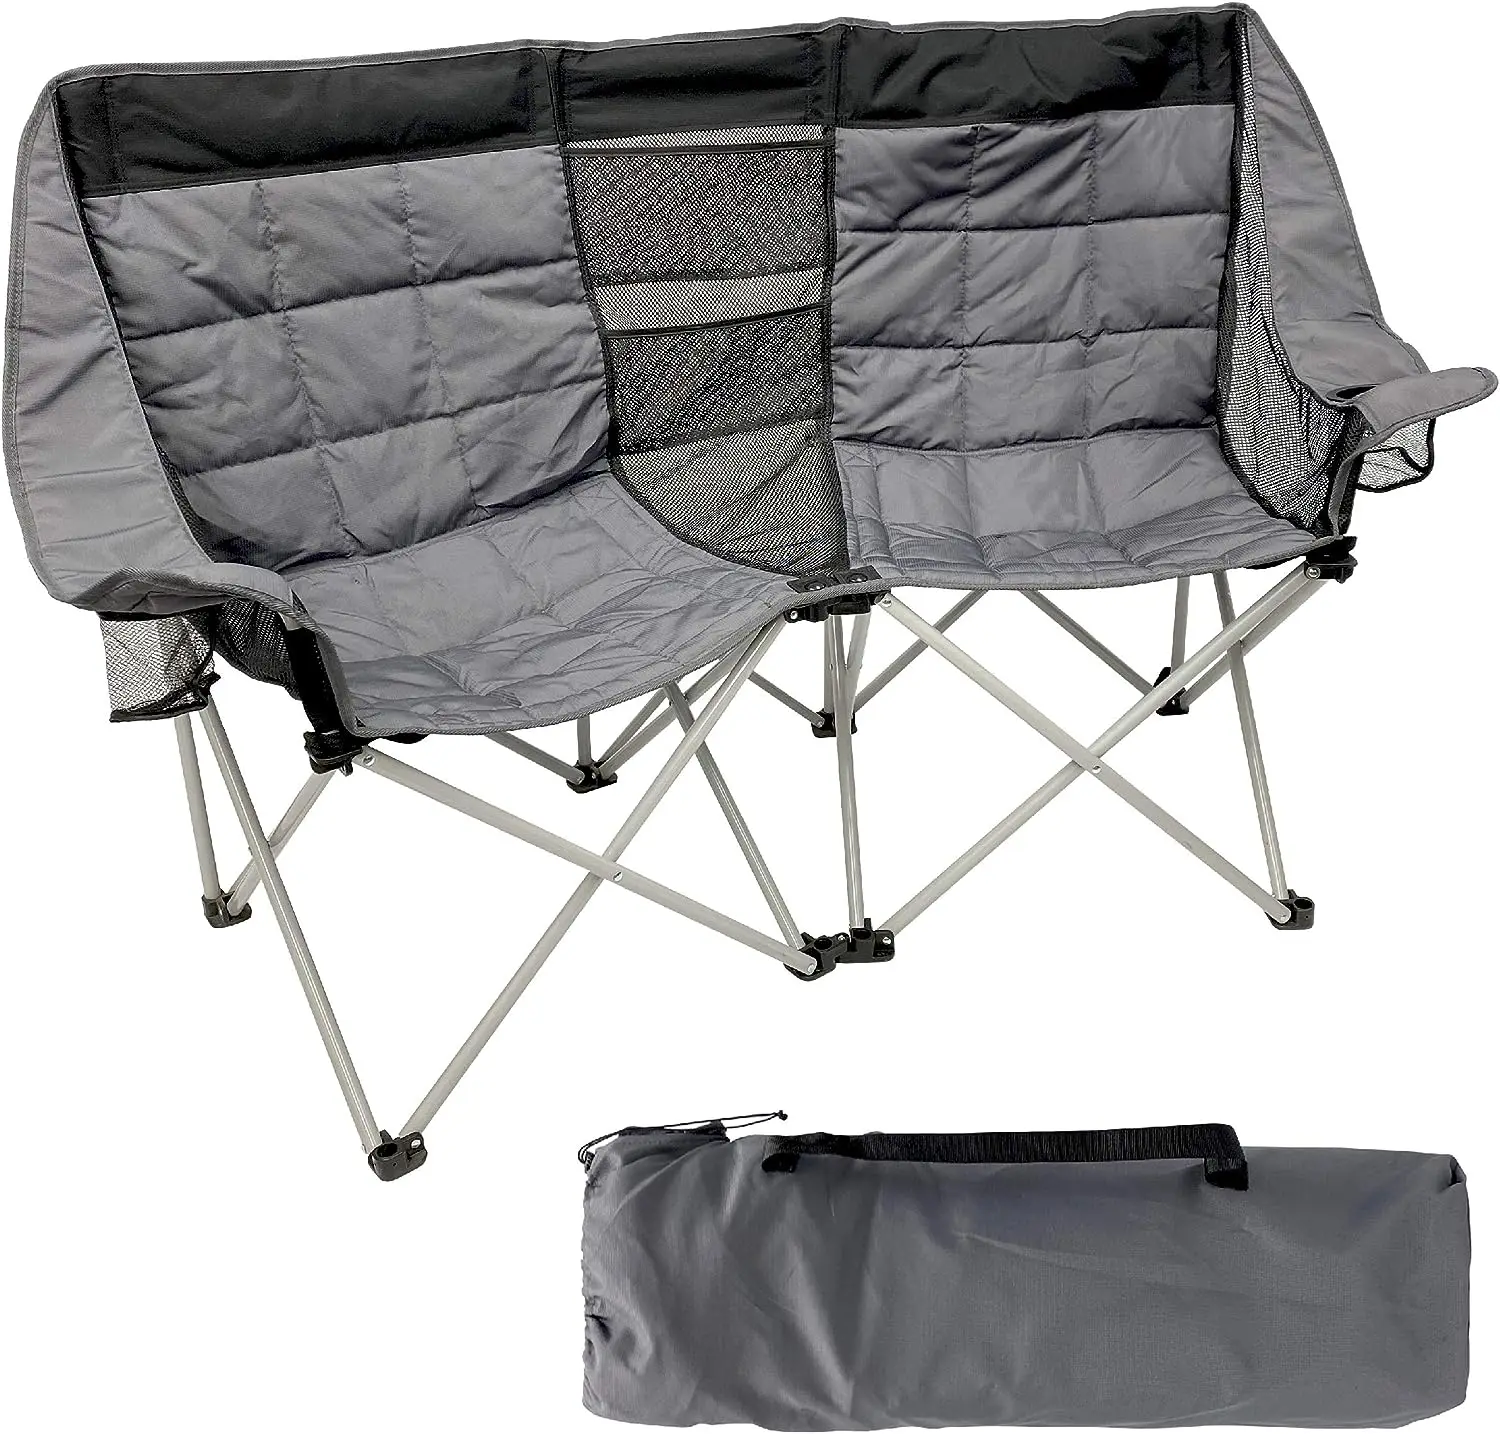 

Camping Chair - Double Love Seat Heavy Duty Oversized - Folds Easily and is Padded, Grey